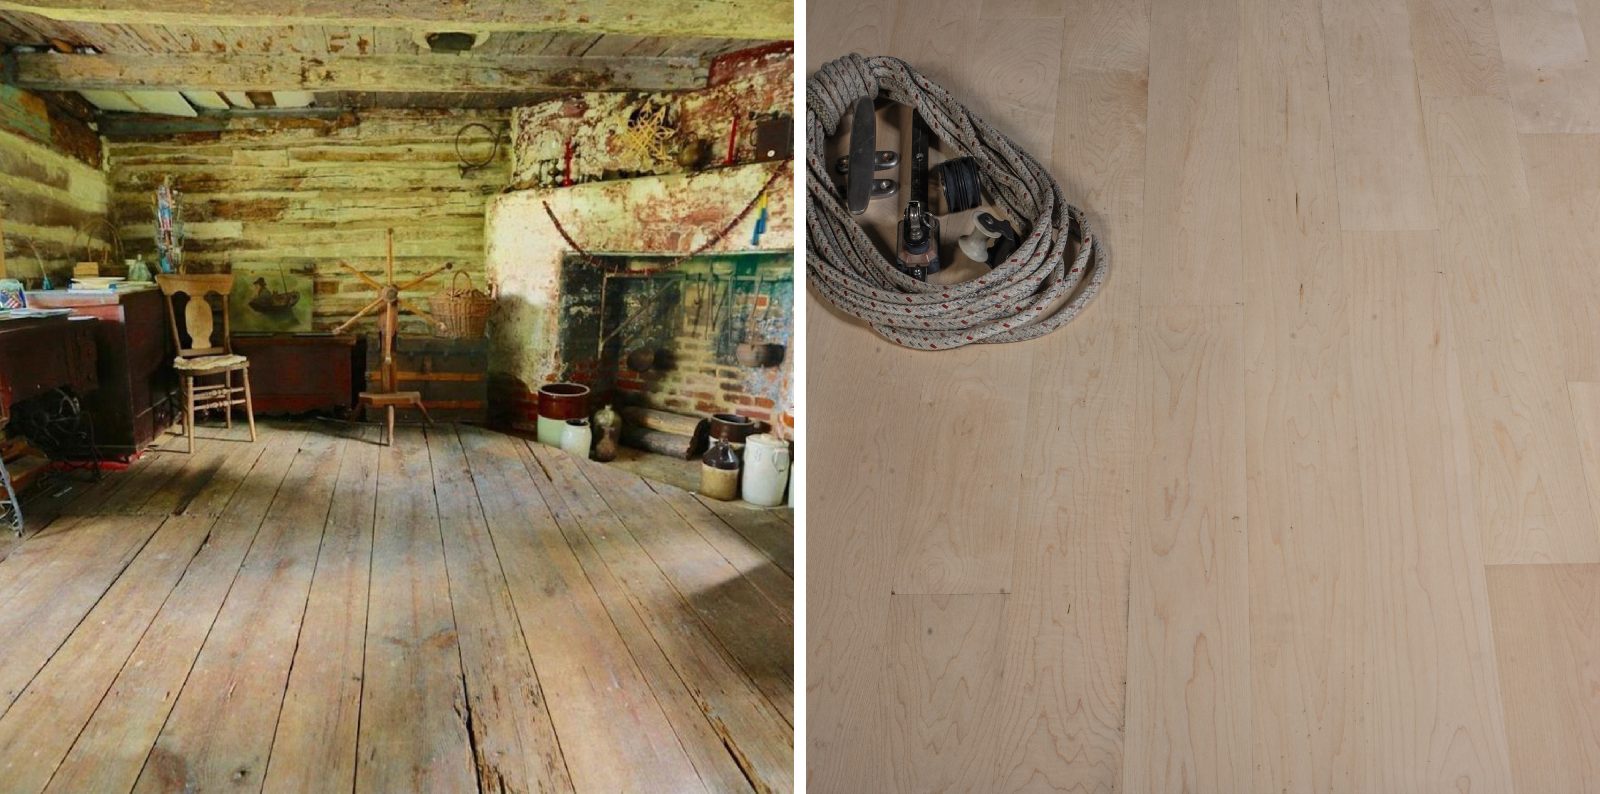 An image showing and comparing unfinished hardwood